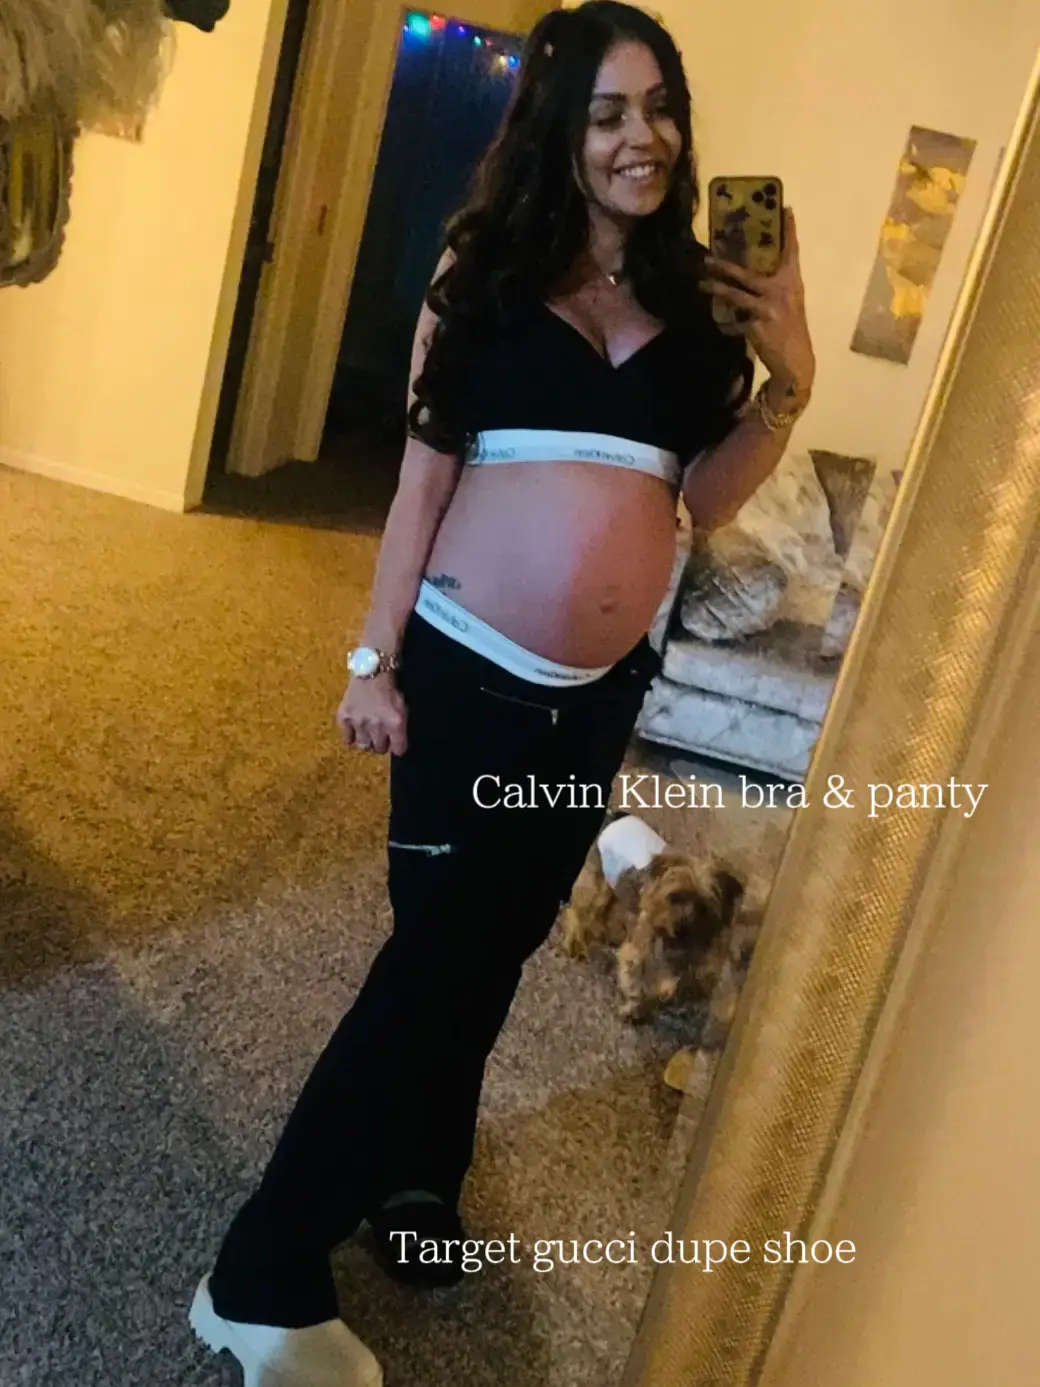 OUTFIT OF THE DAY (15 WEEKS PREGNANT)